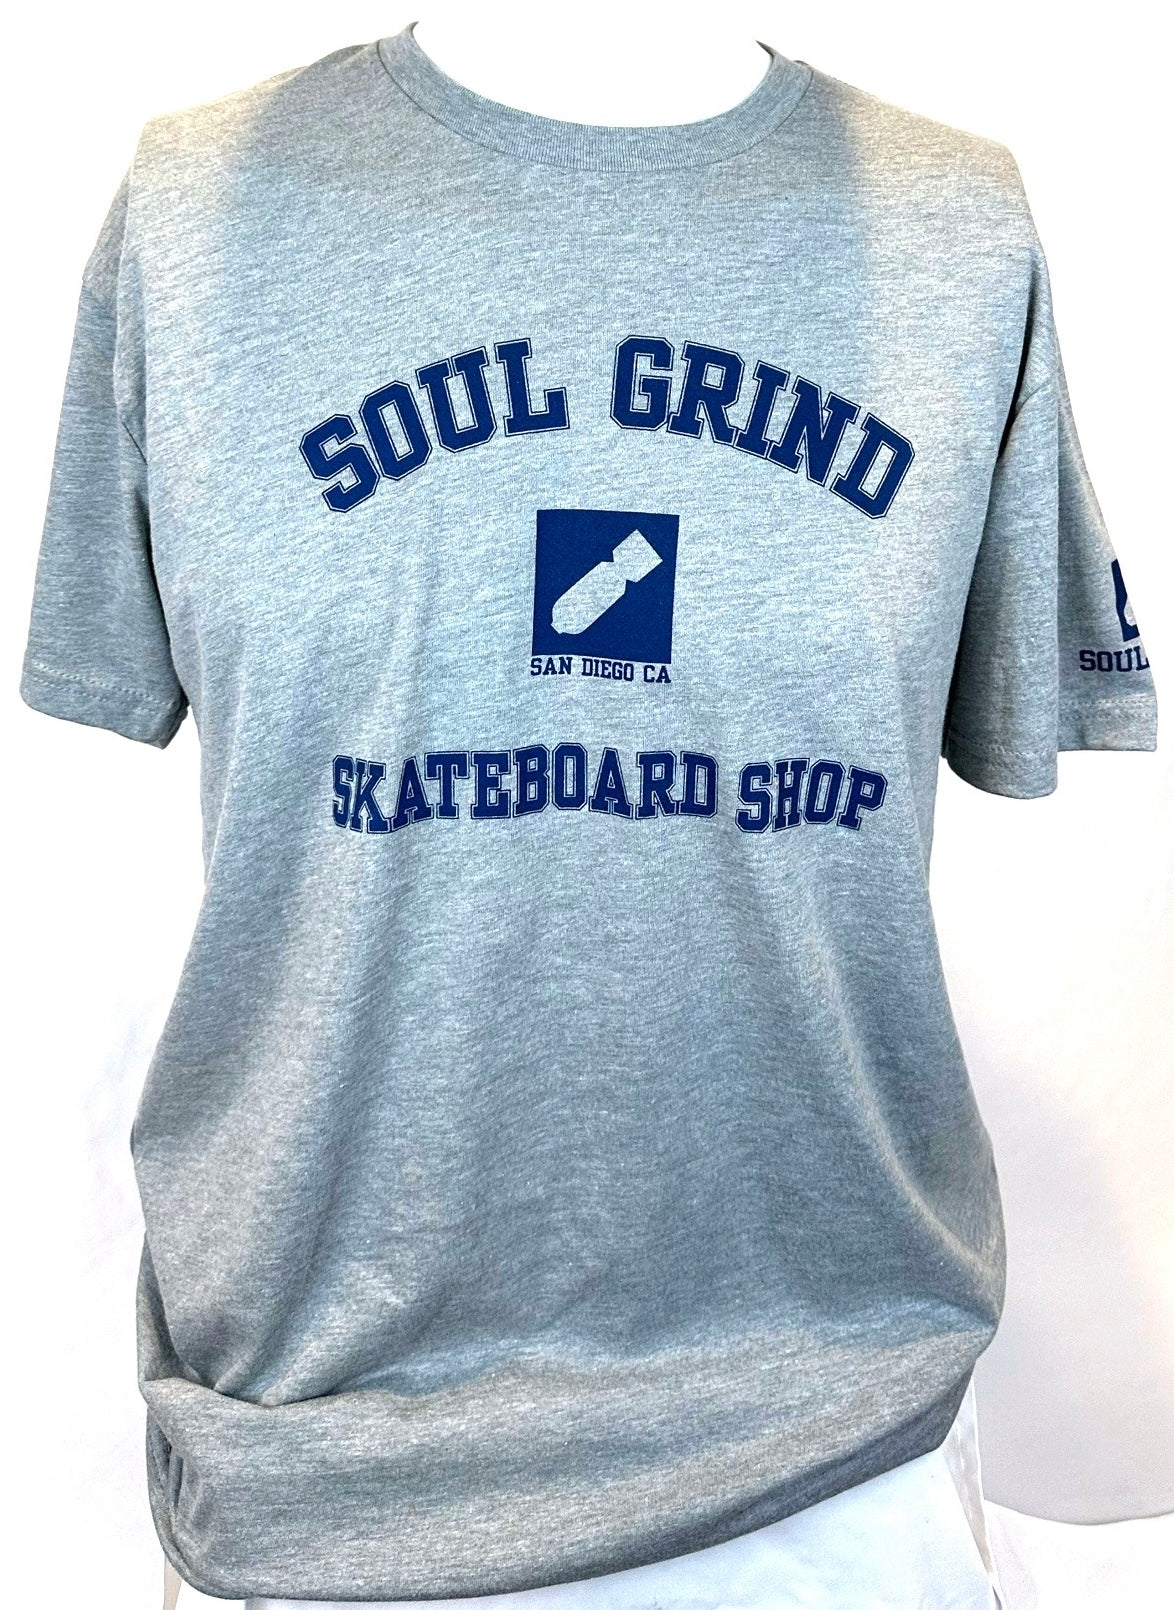 Soul Grind T-Shirt Large Gray College